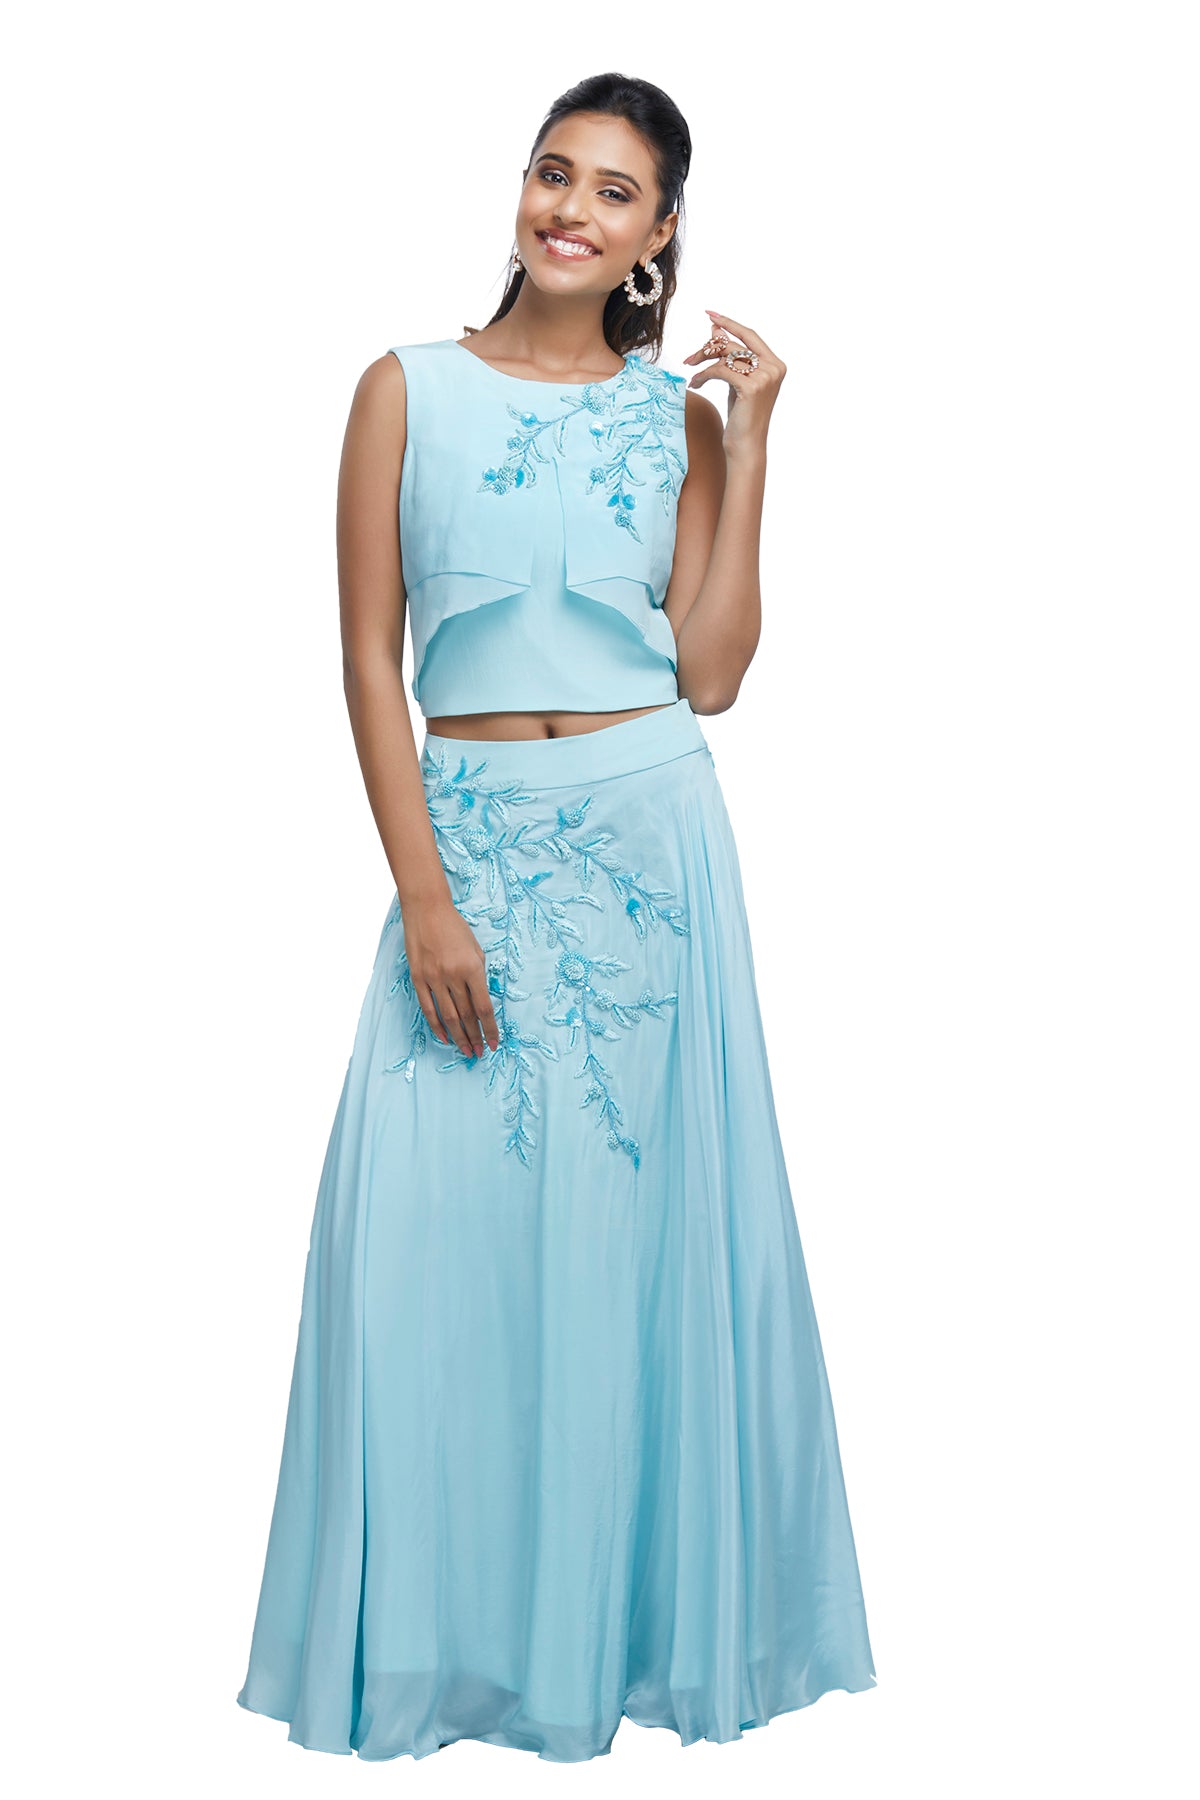 Baby blue crop top and skirt